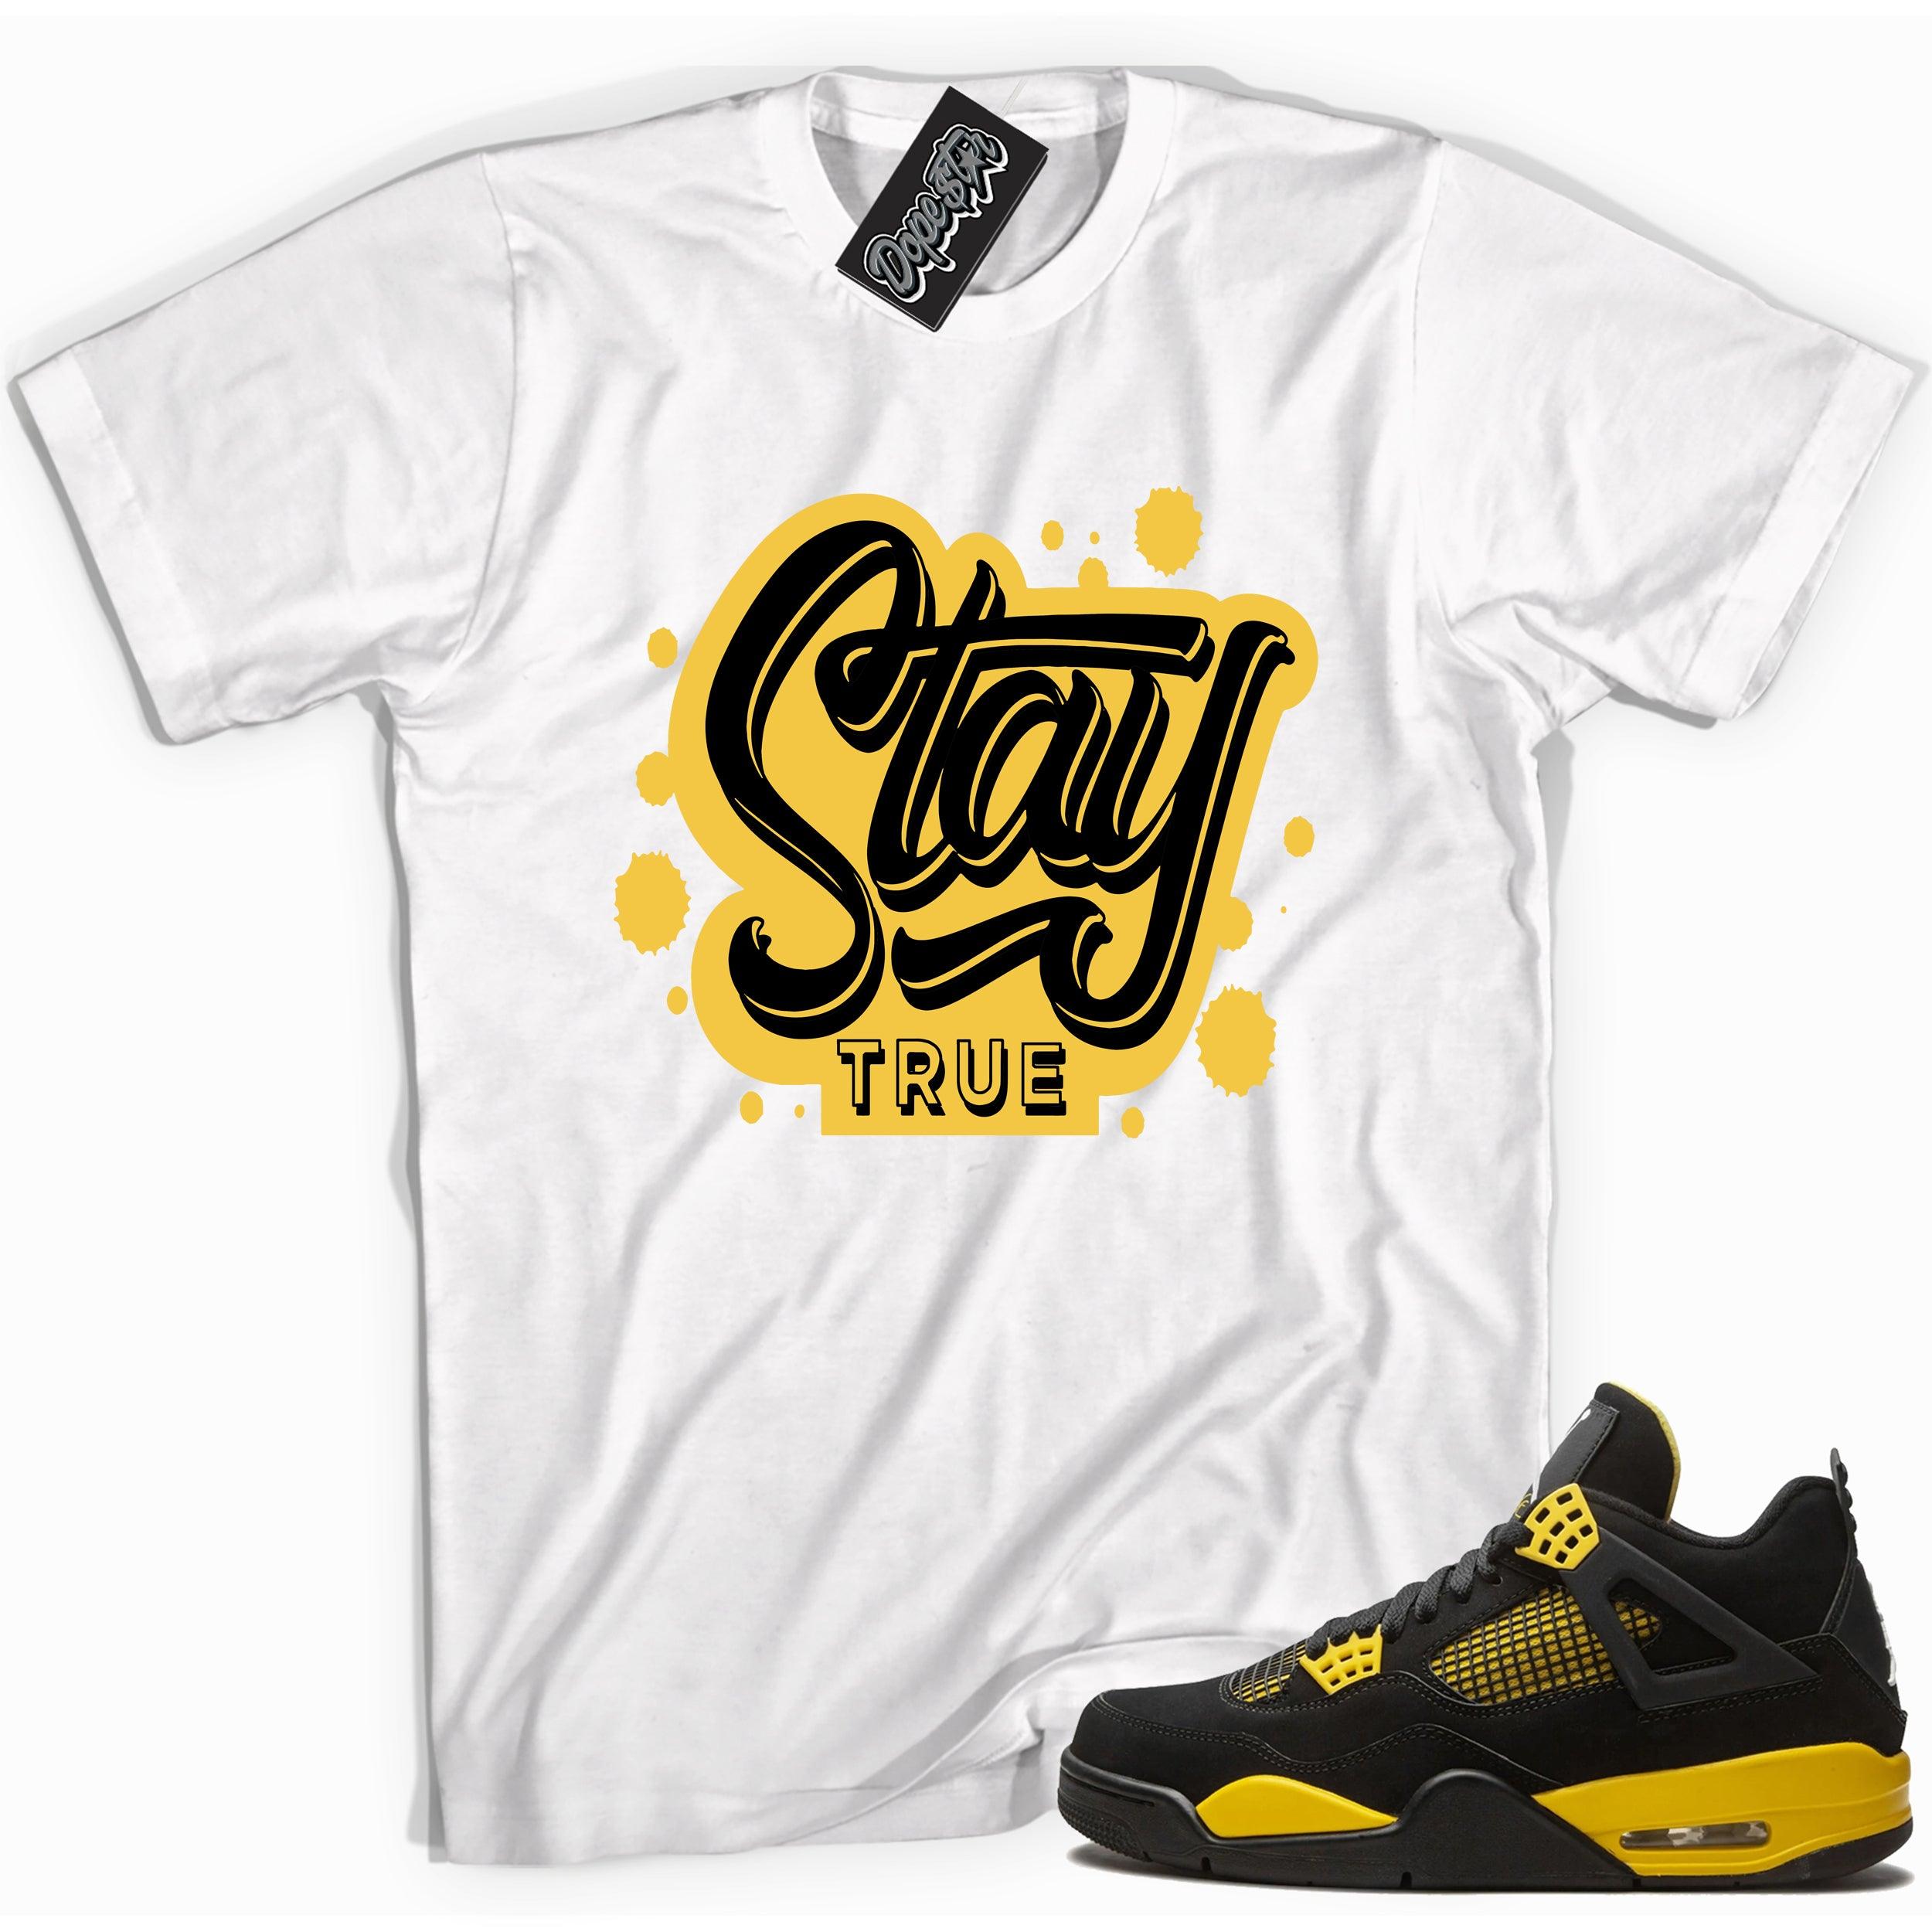 Cool white graphic tee with 'stay true' print, that perfectly matches Air Jordan 4 Thunder sneakers